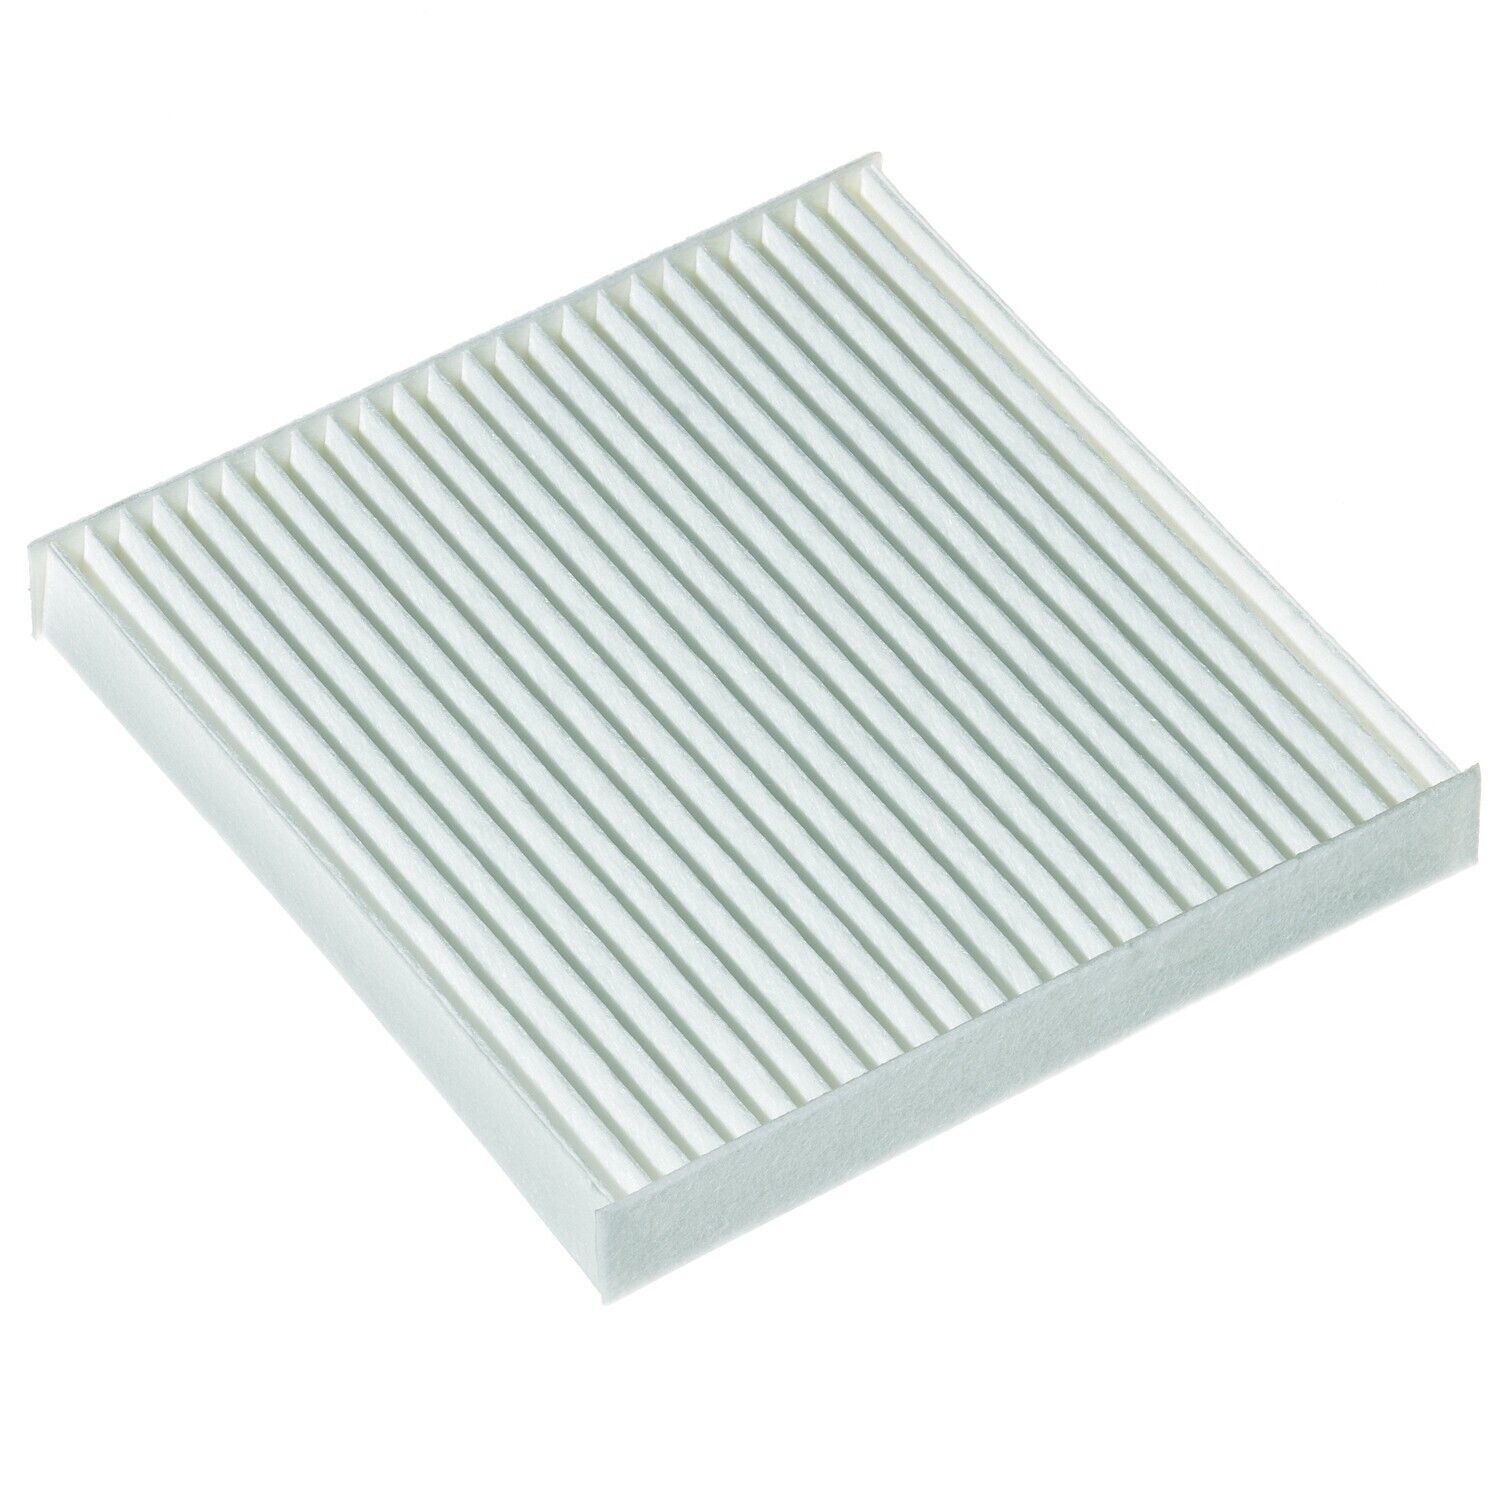 Cabin Air Filter for Accord, ILX, RDX, TSX, Civic, CR-V, Crosstour+More CF-40